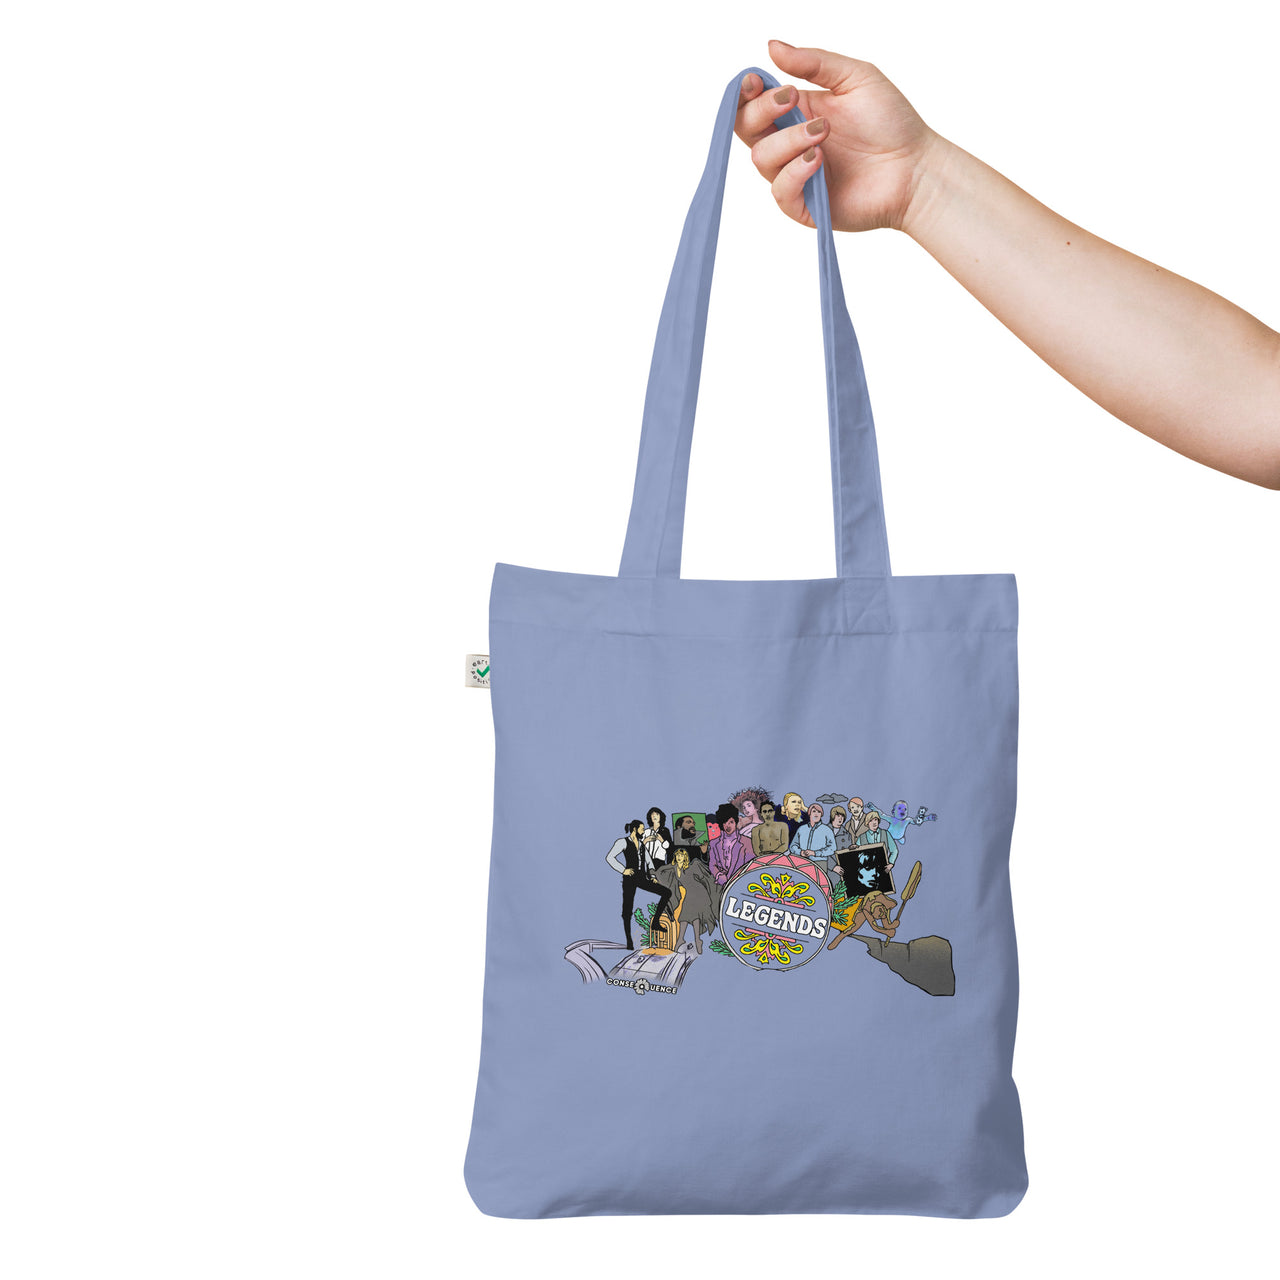 100 Greatest Albums of All Time: Legends Organic Tote Bag